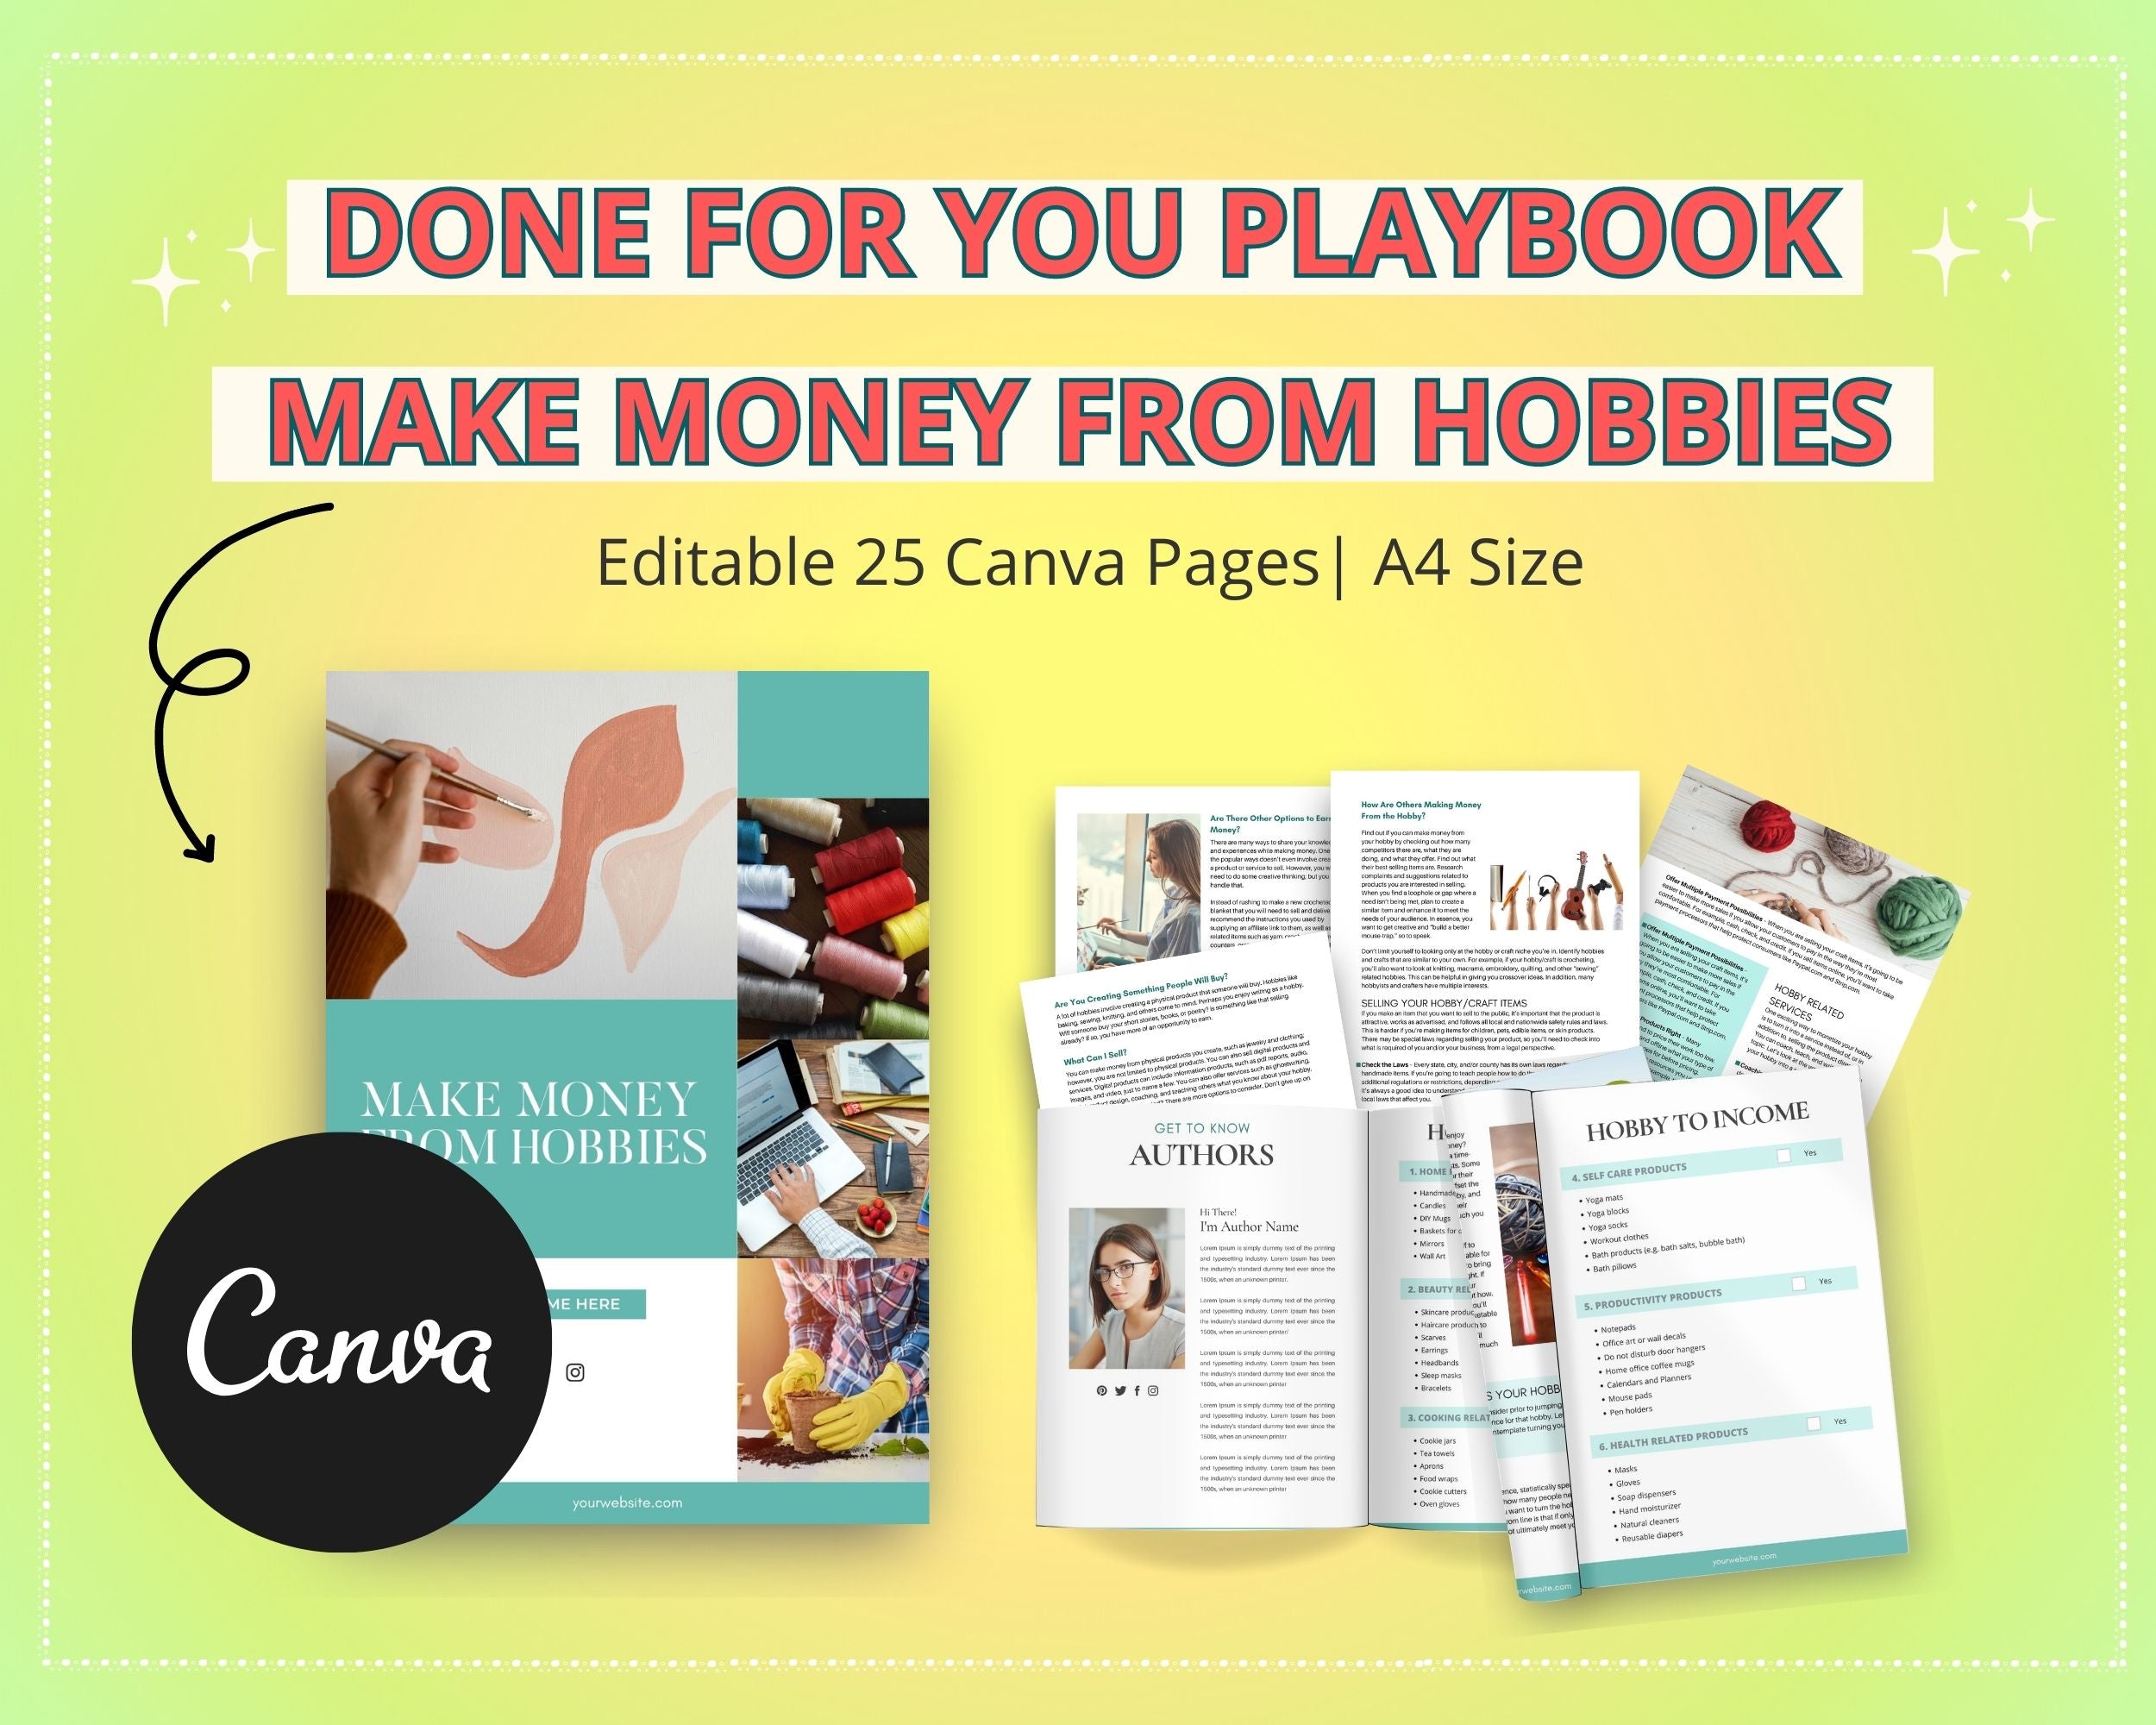 Make Money From Hobbies Playbook in Canva